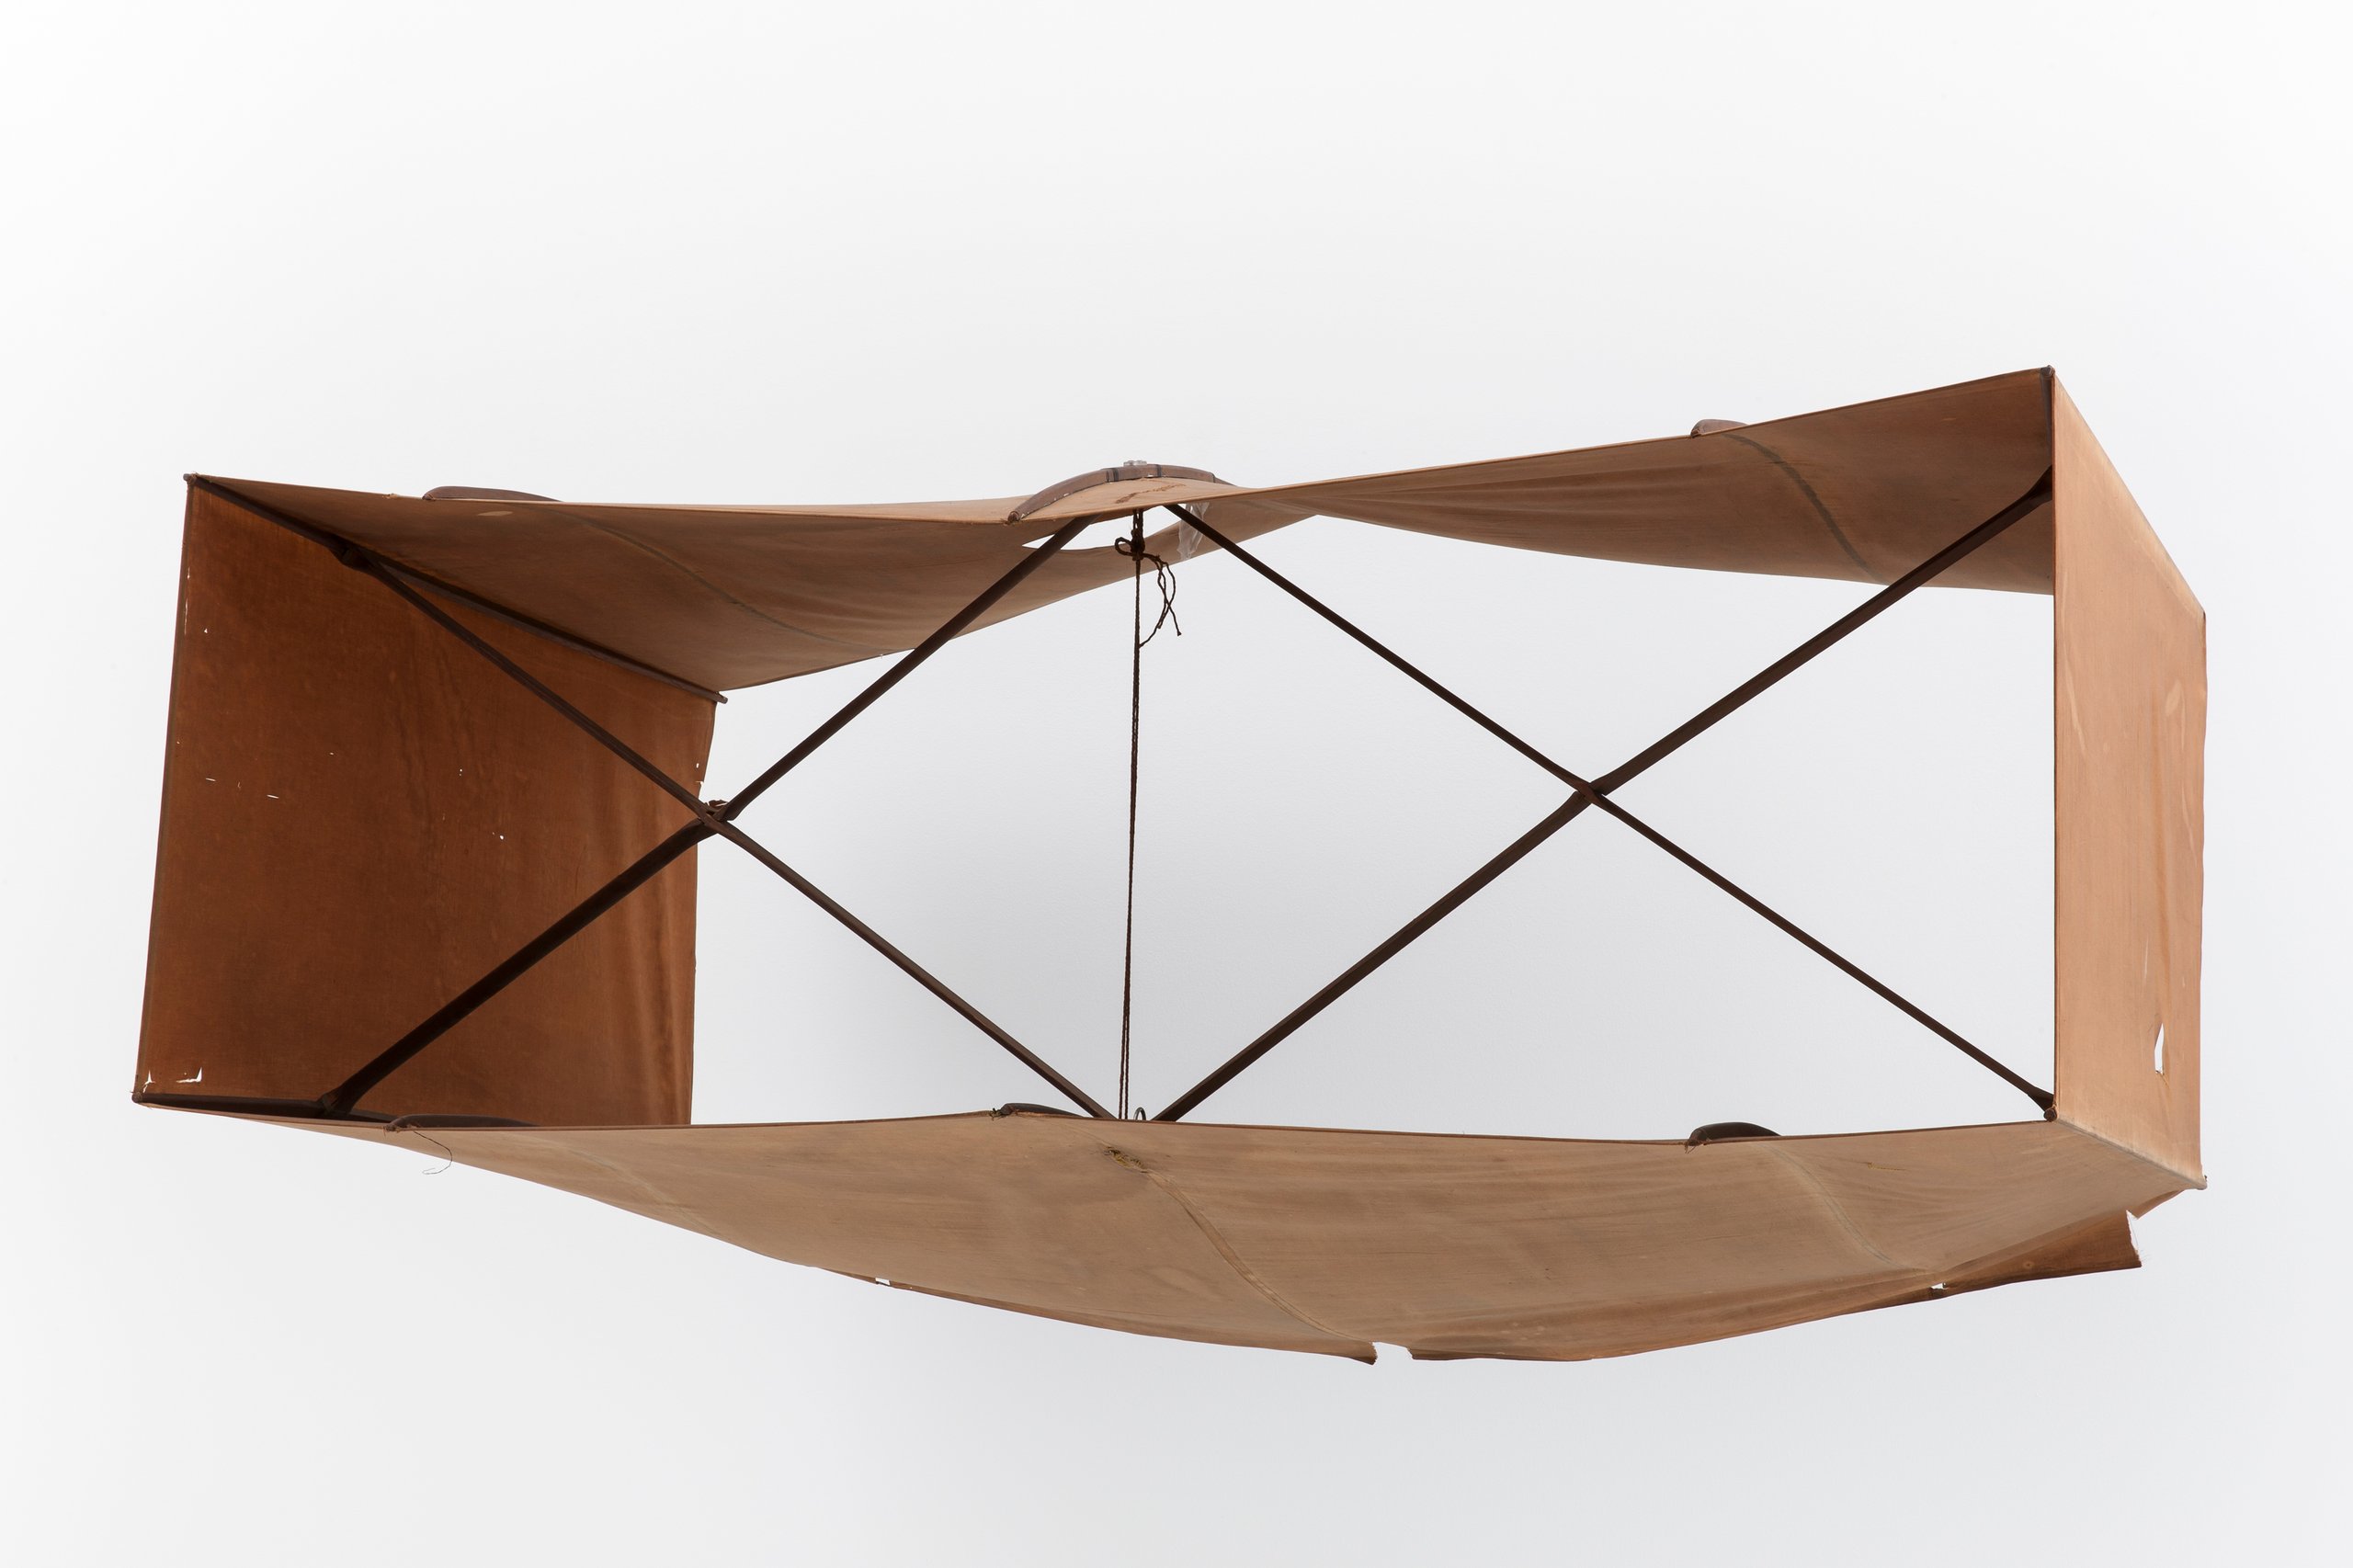 Box kite designed by Lawrence Hargrave